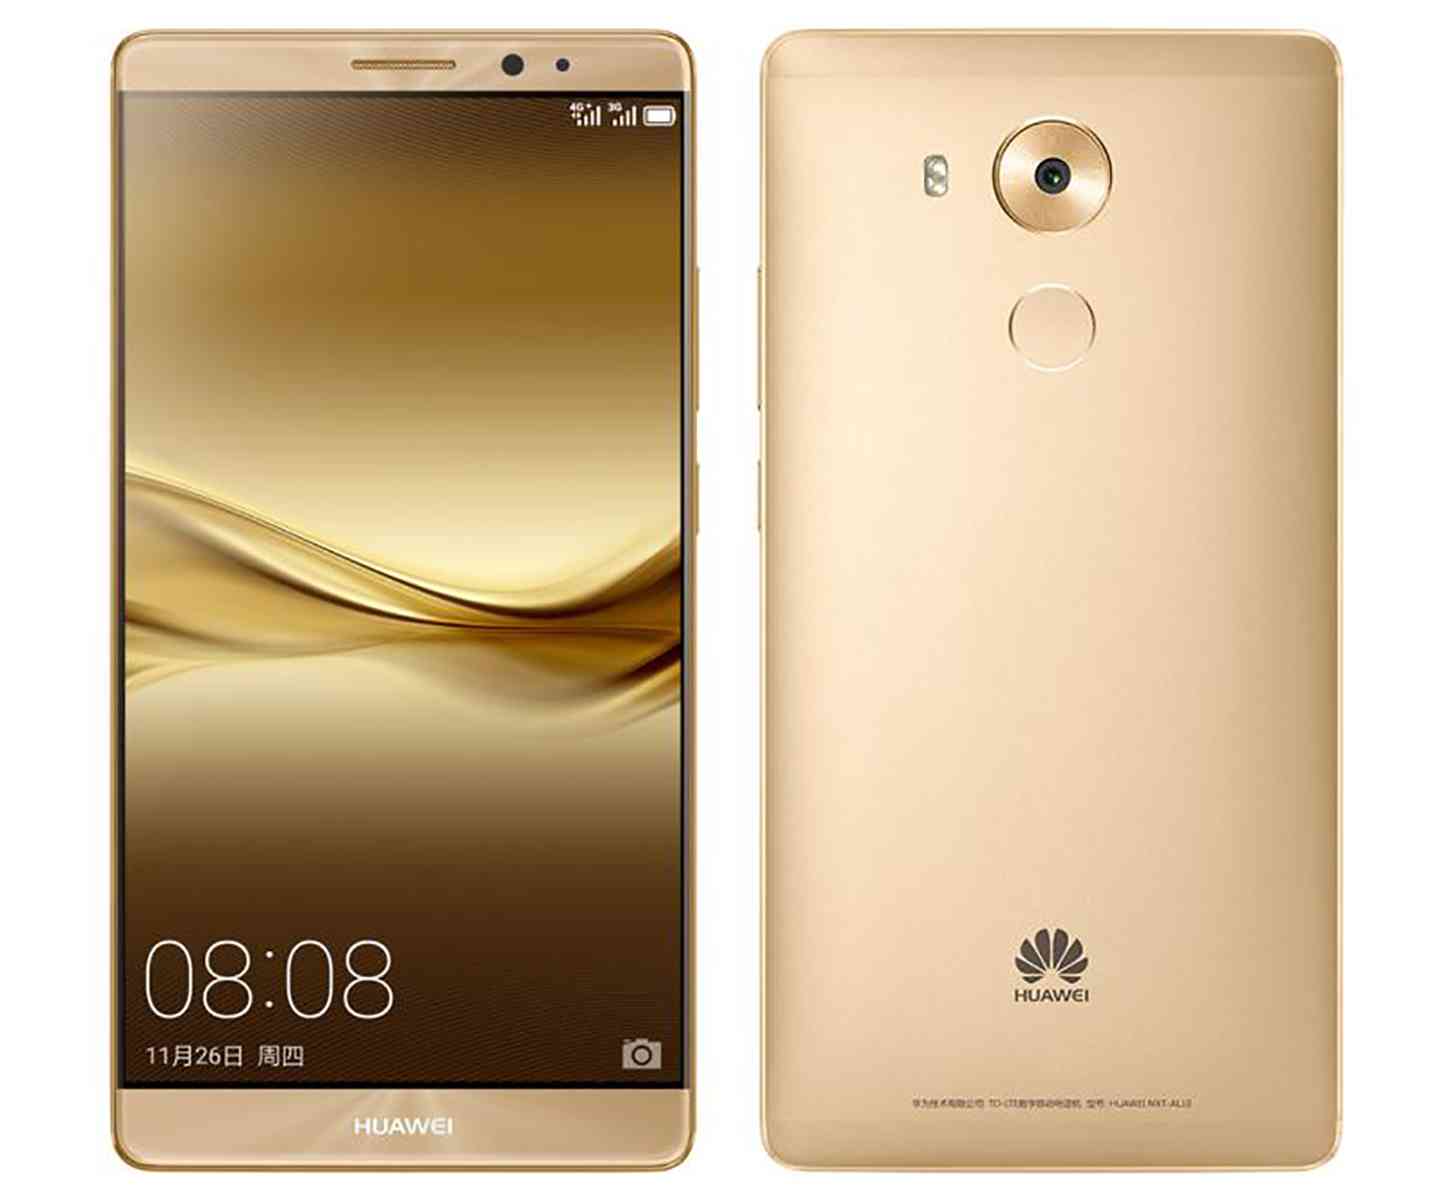 Huawei Mate 8 Launched in Nepal; Price and Specifications